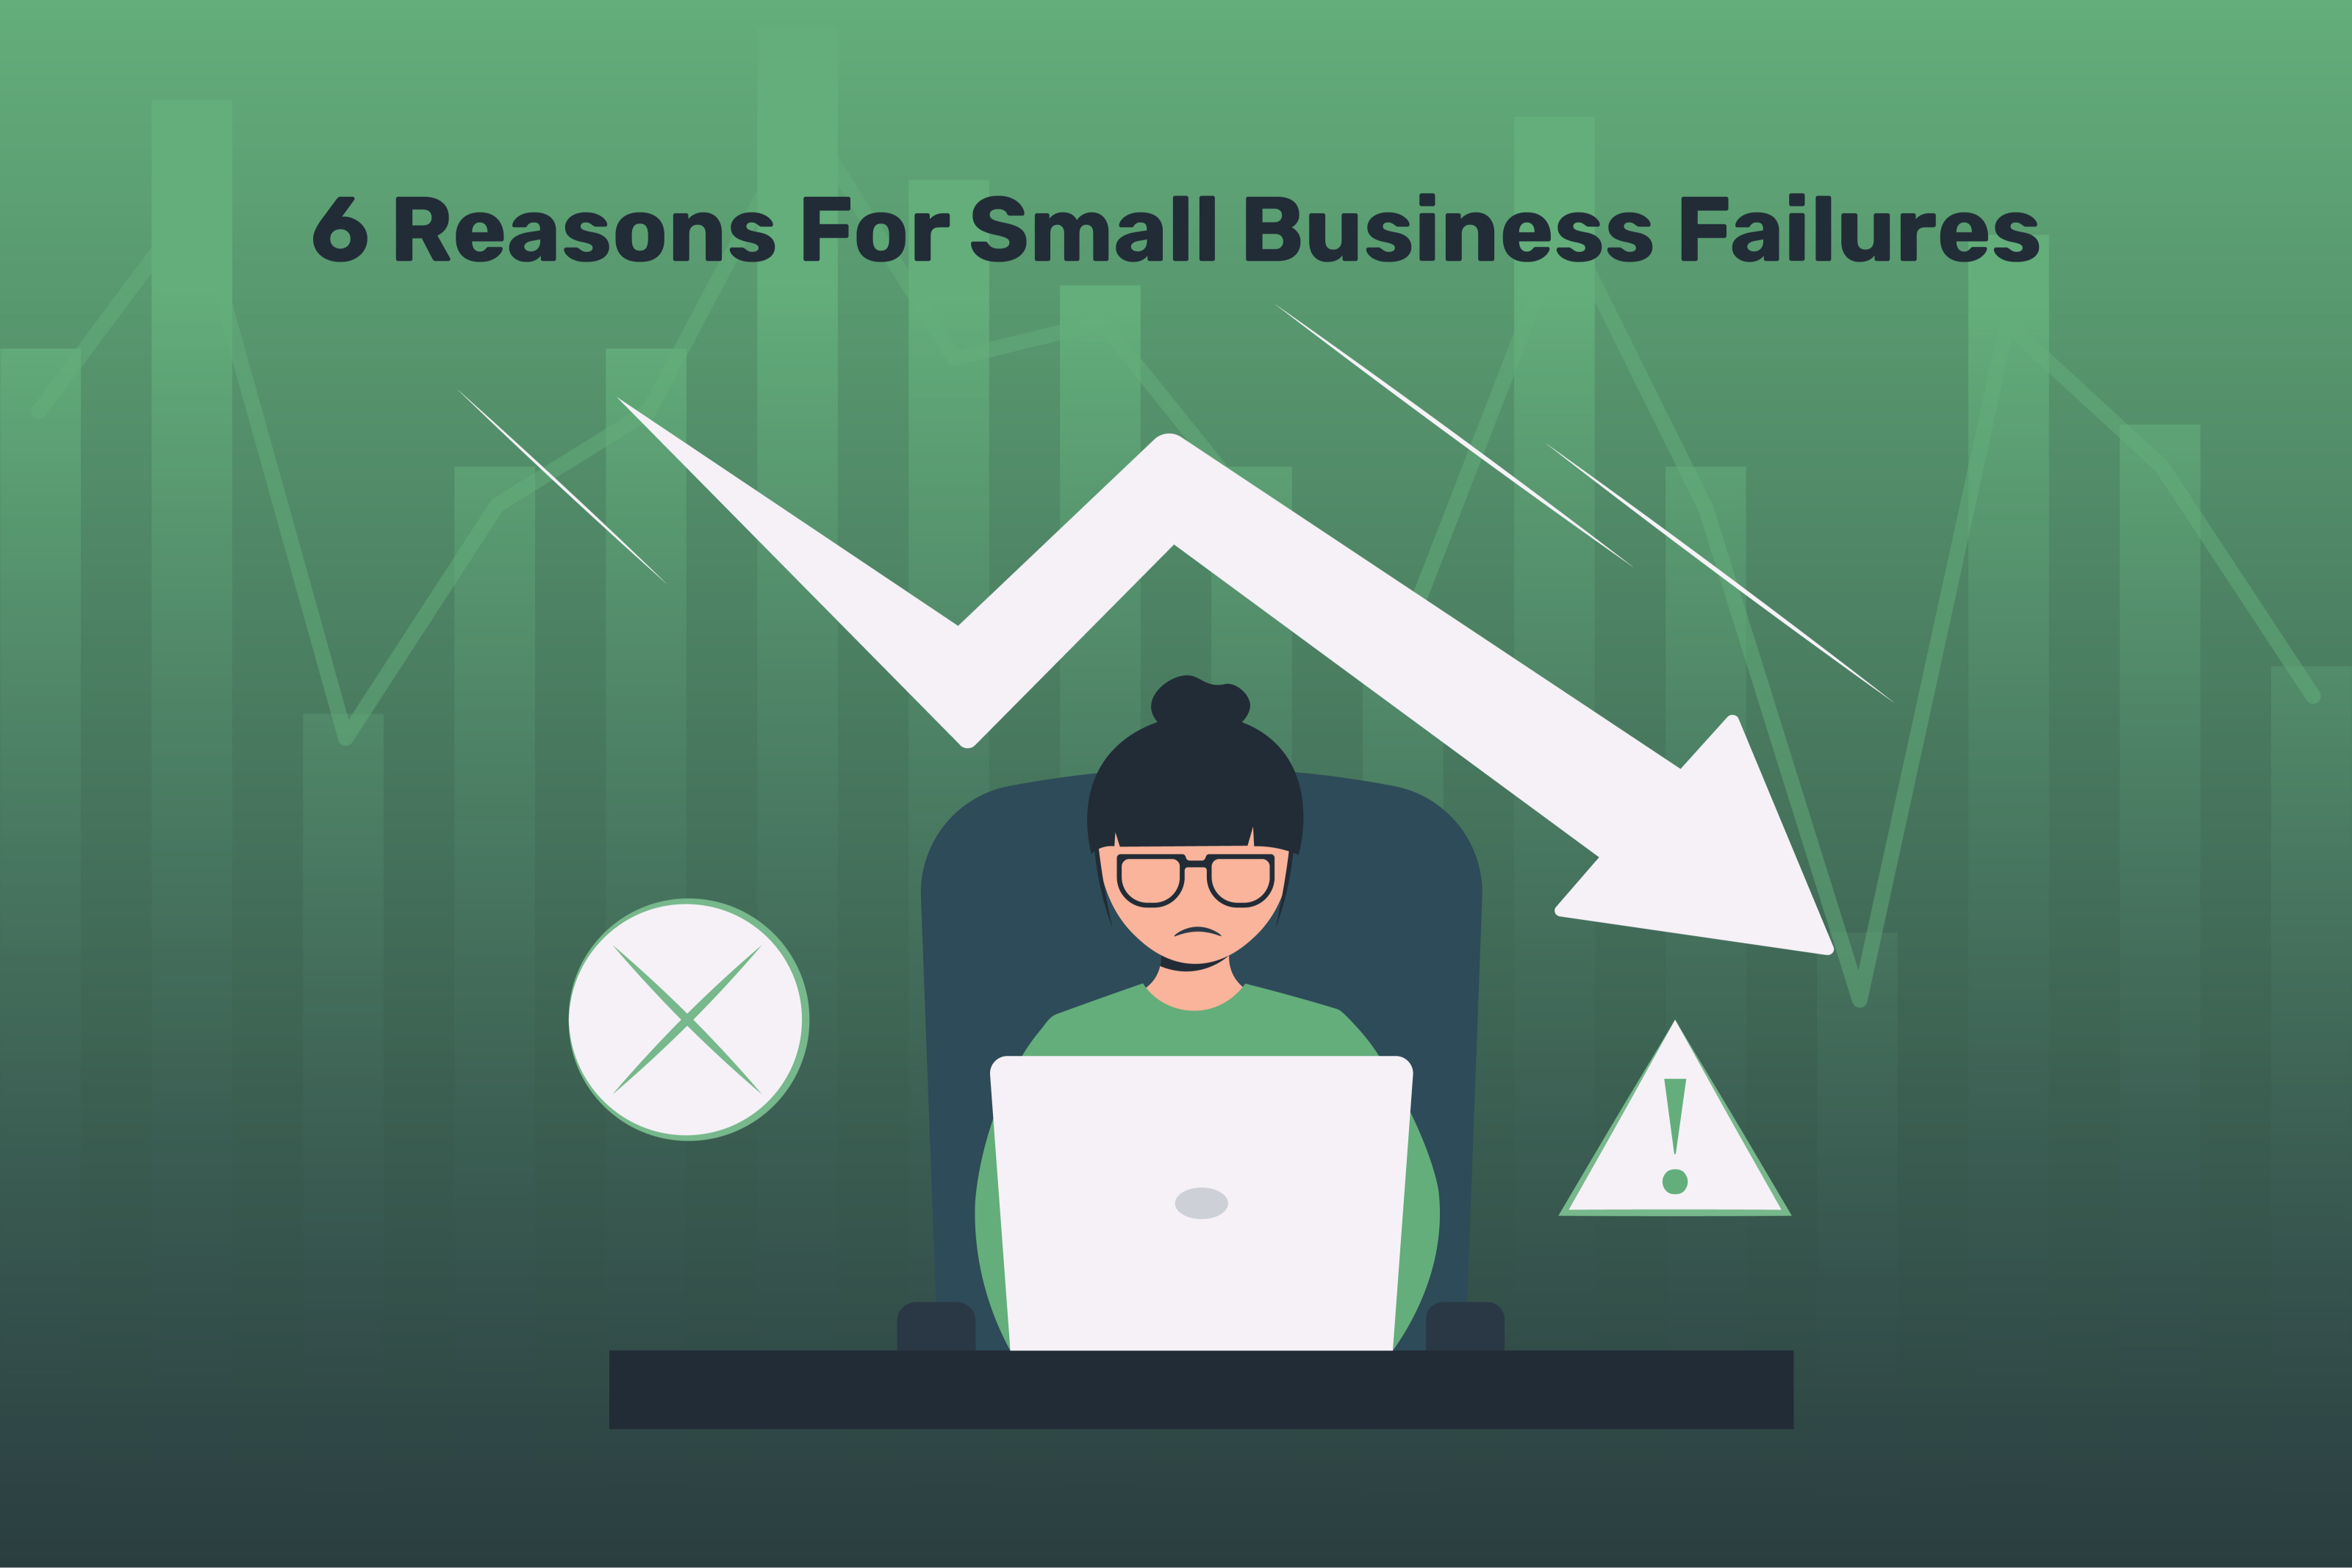 Small Business Failures